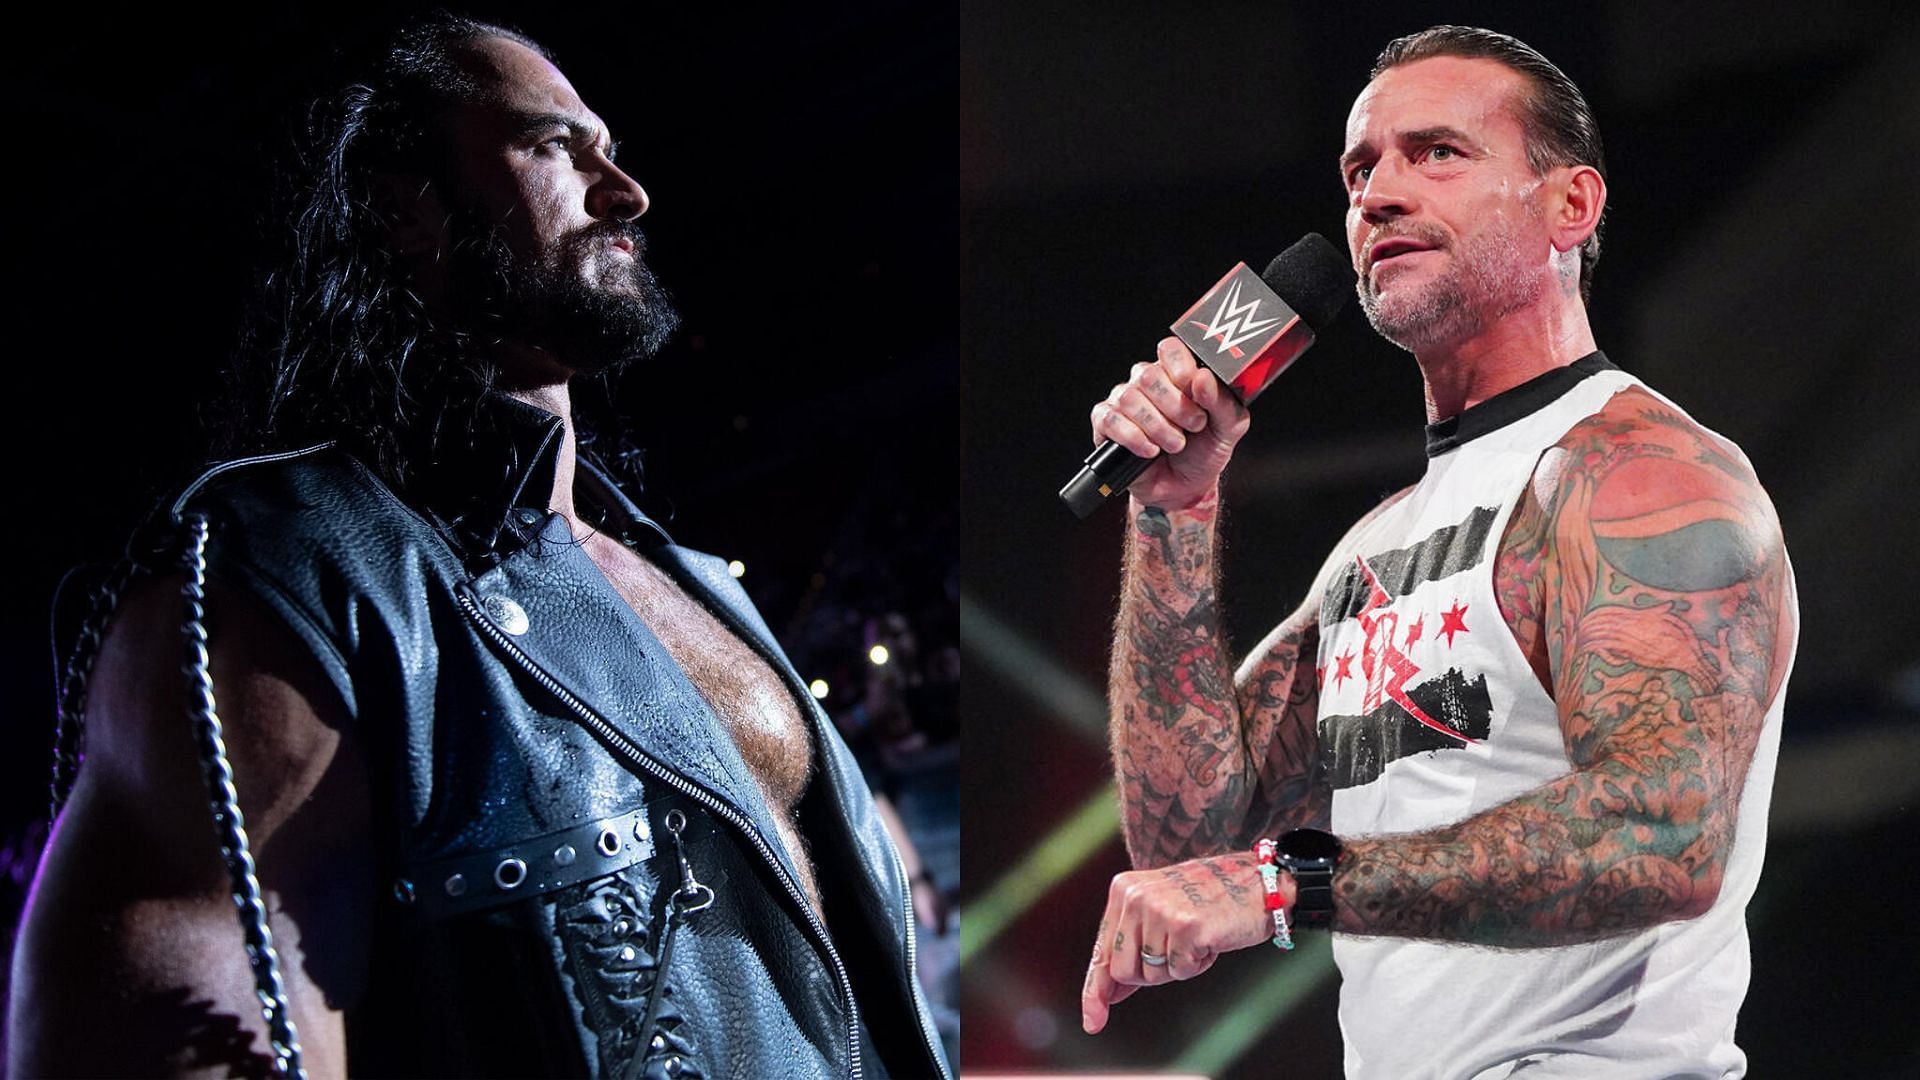 Punk and McIntyre currently in a rivalry.